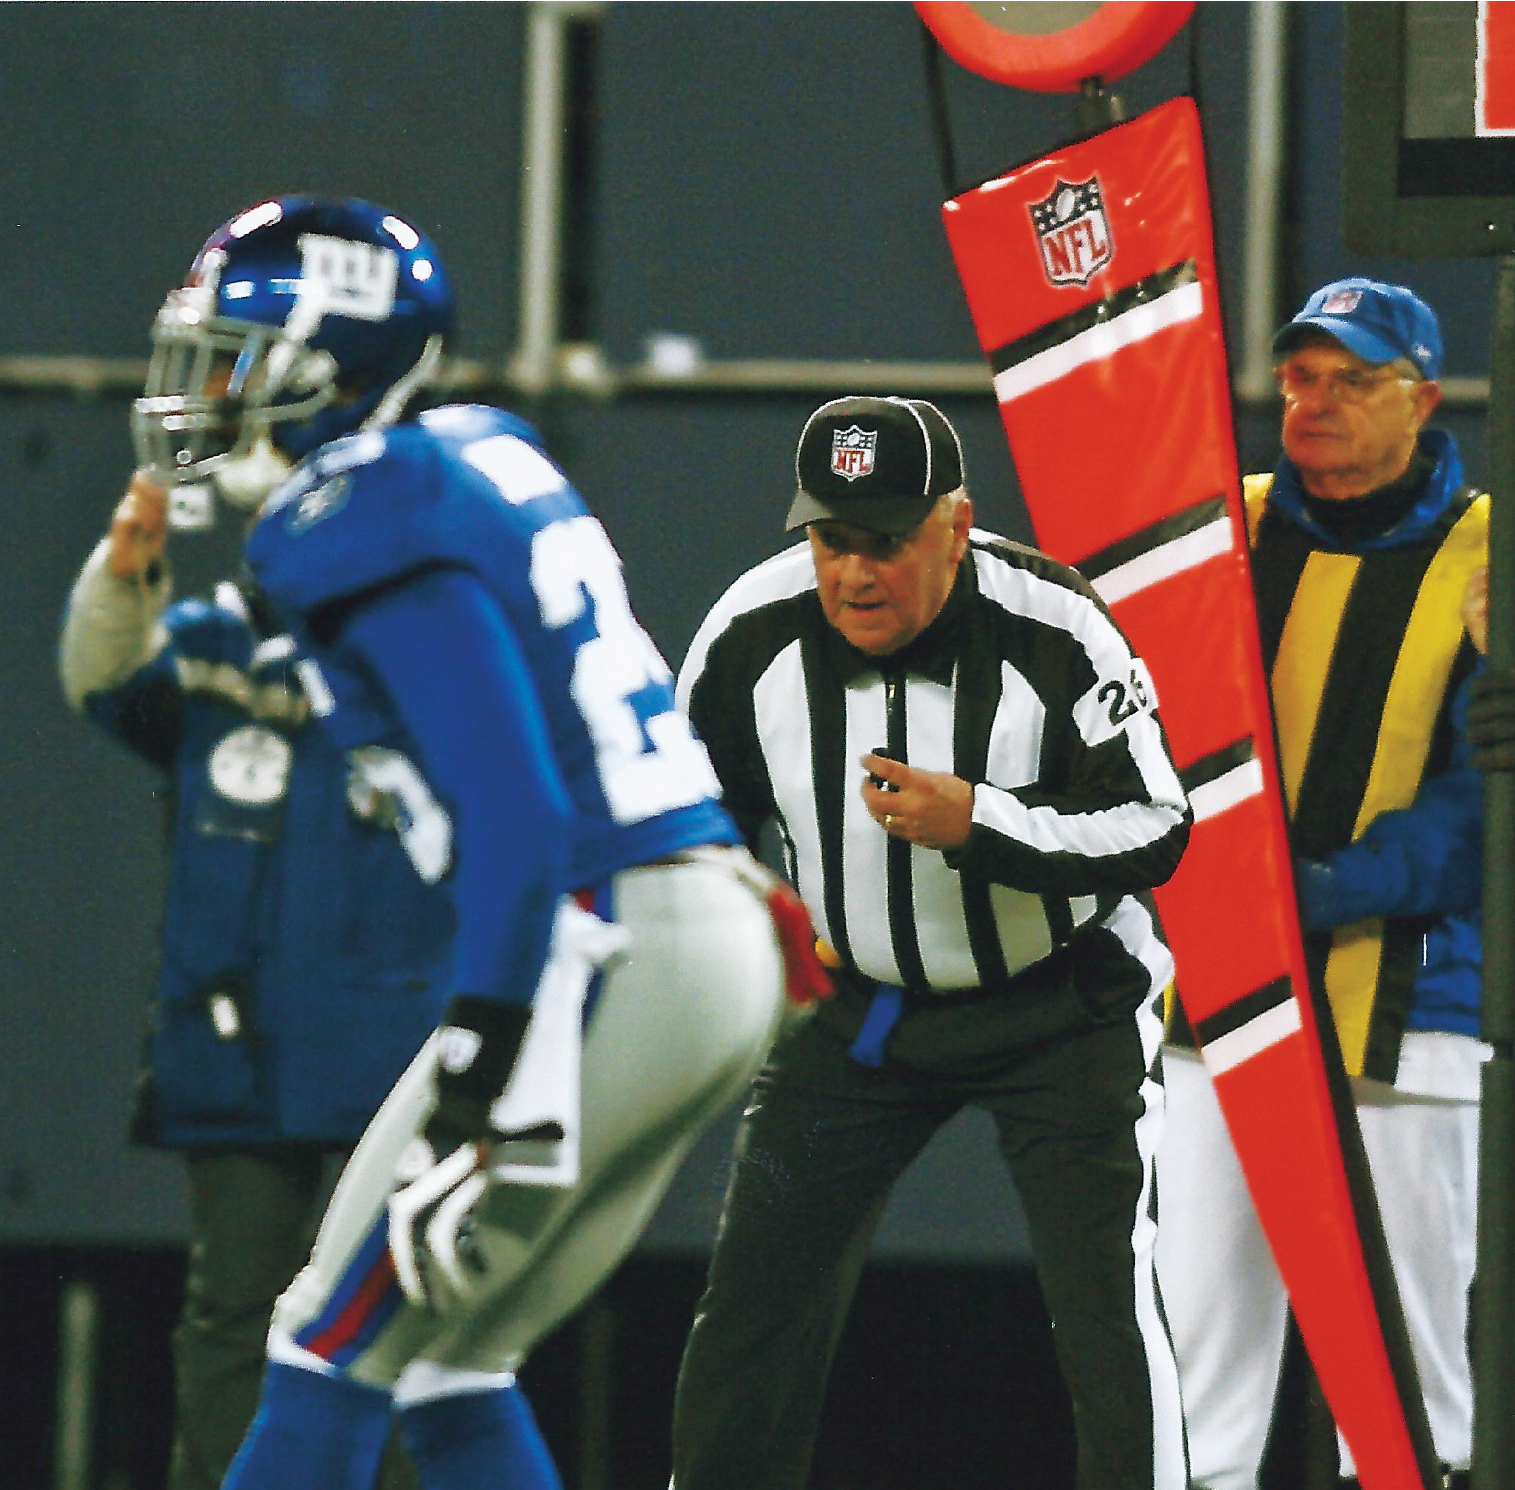 the referee watches as the football player gets ready for the snap